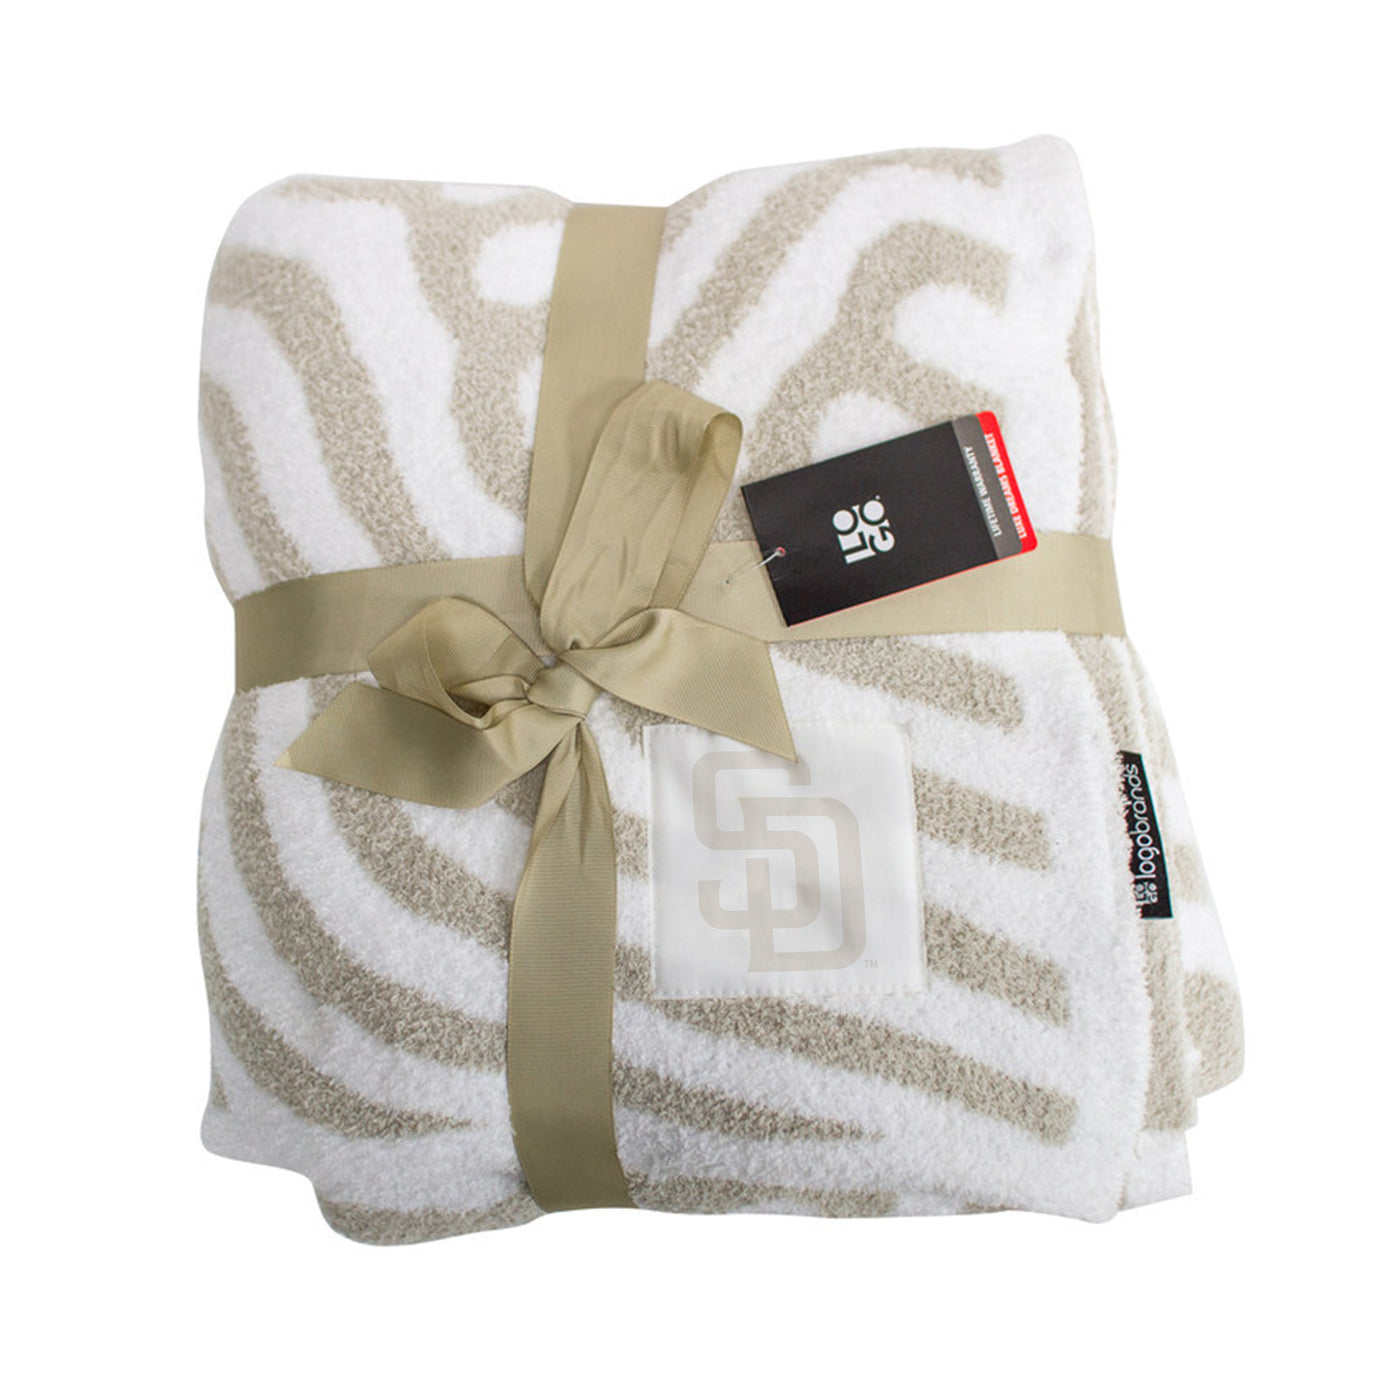 SD Padres Luxe Dreams Throw